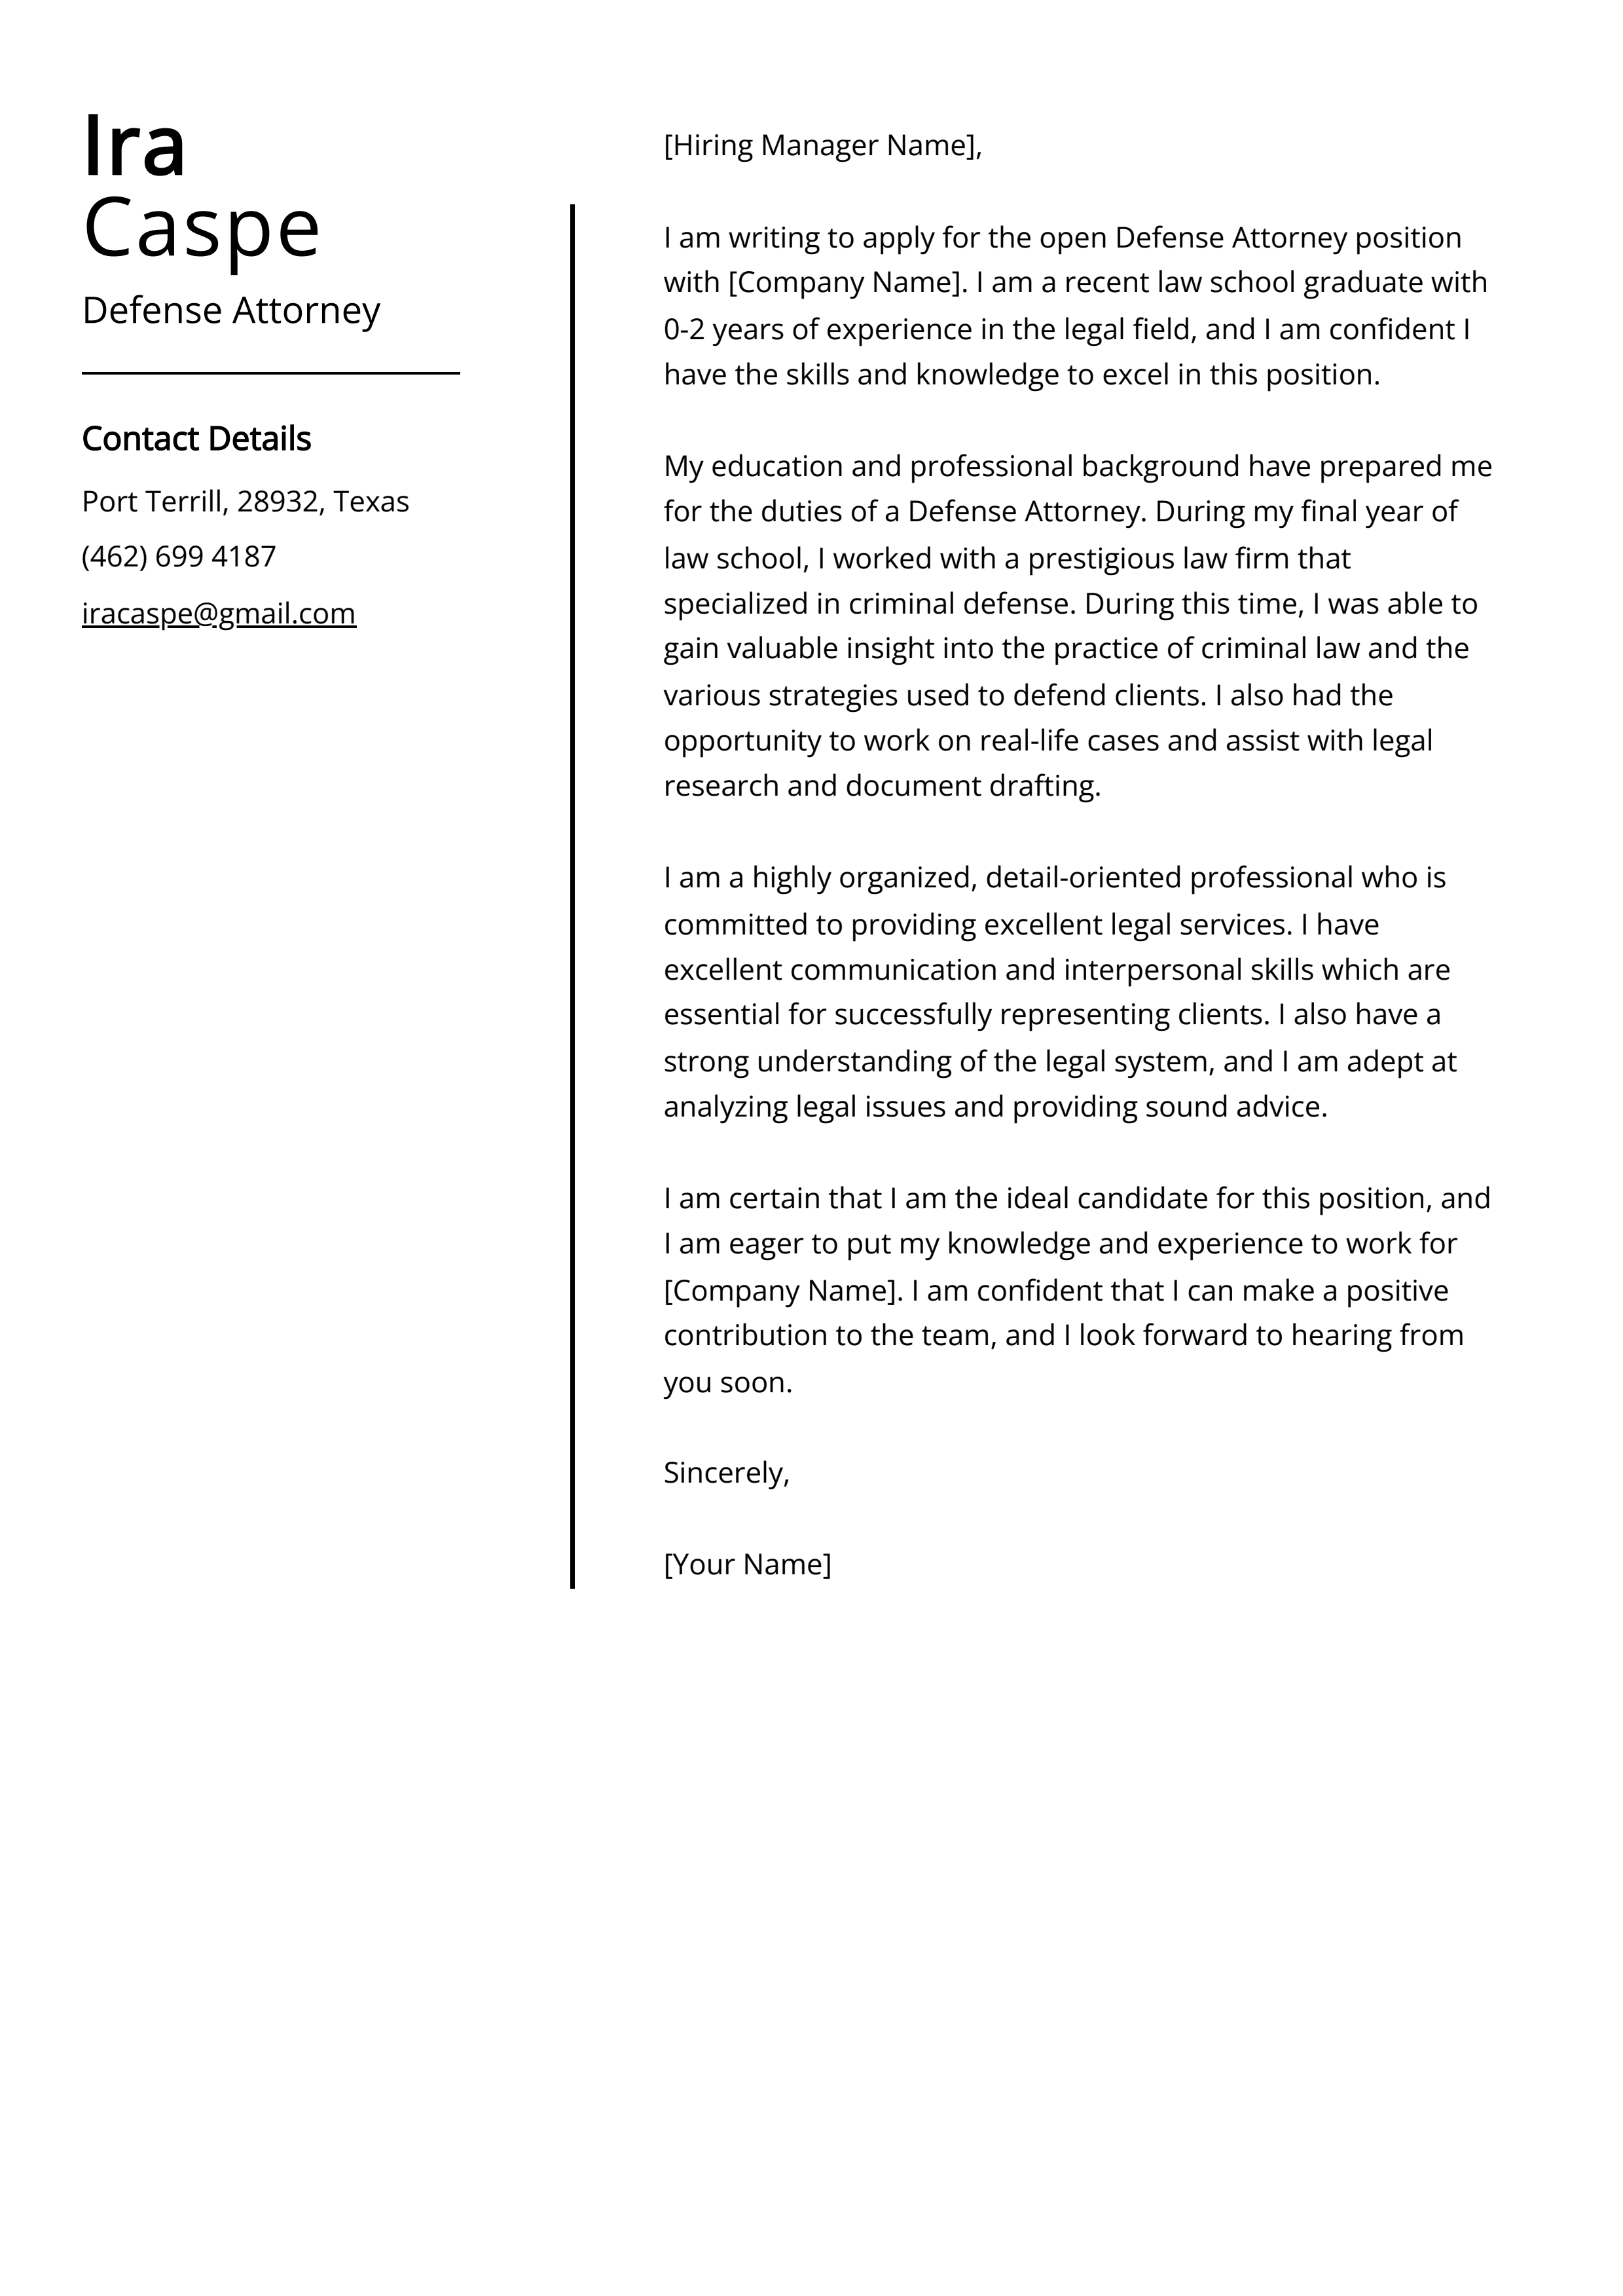 Defense Attorney Cover Letter Example